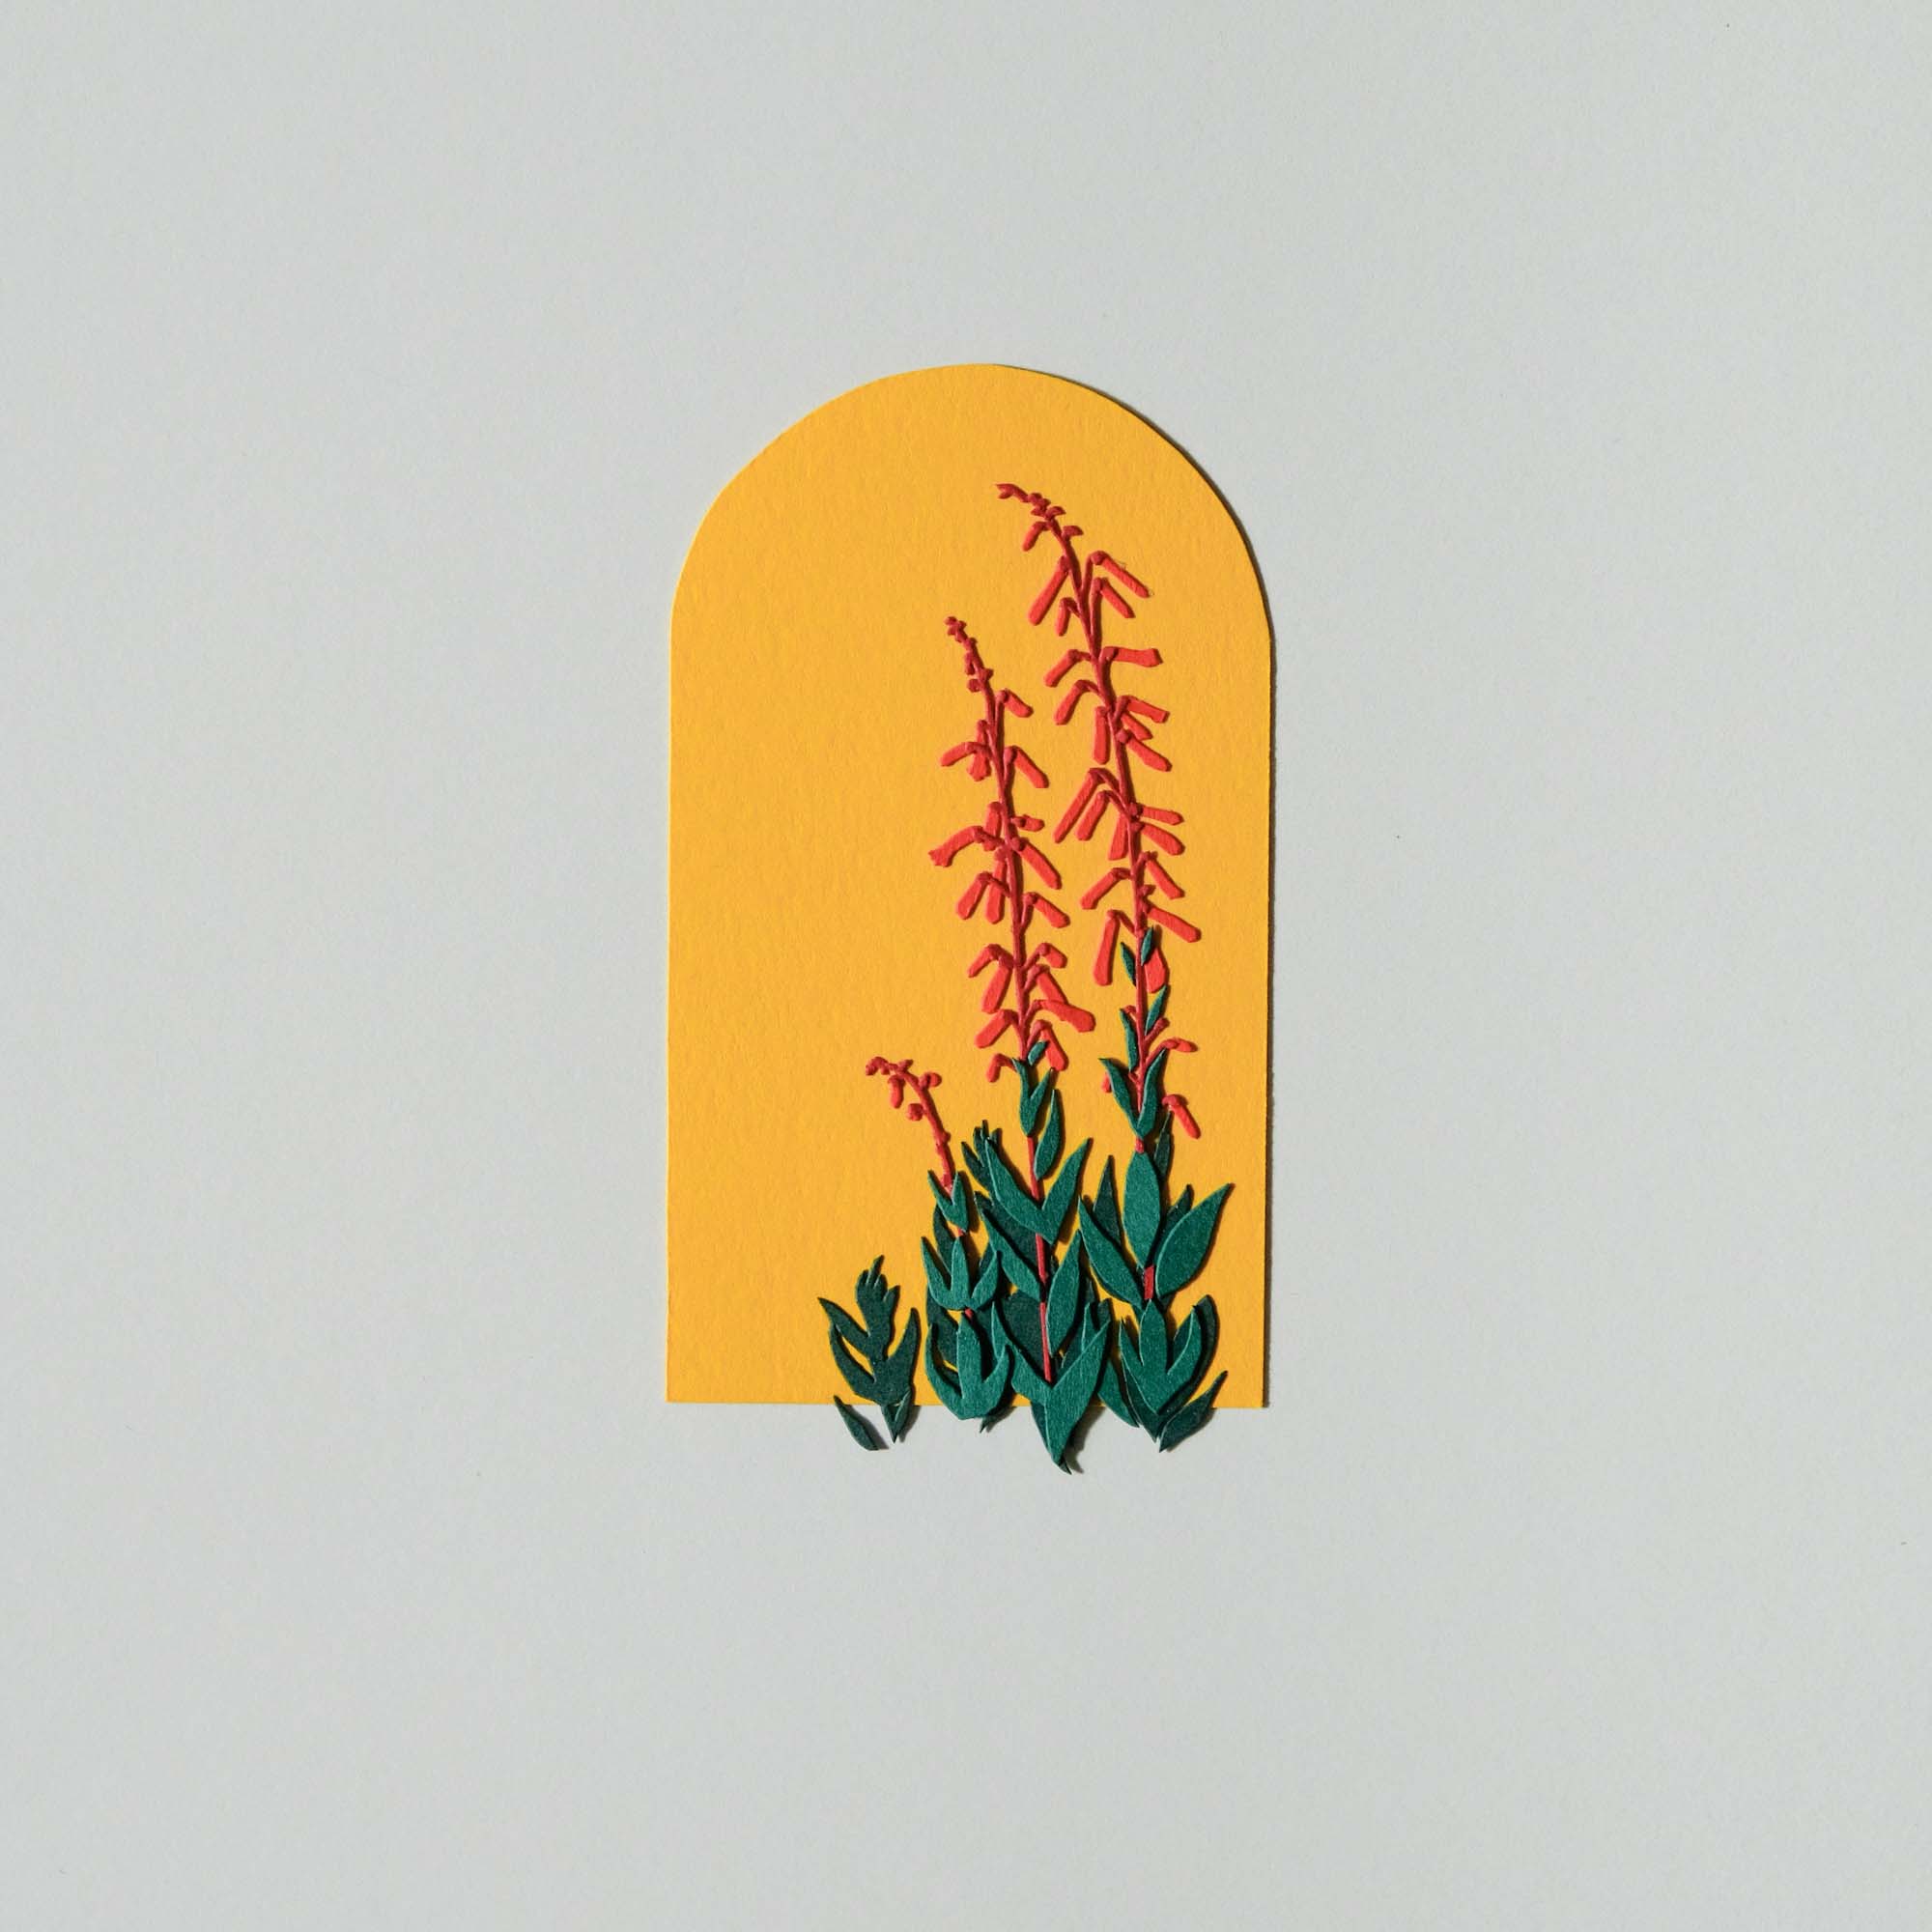 A paper scarlet bugler plant with red flowers sits on an arched yellow background.